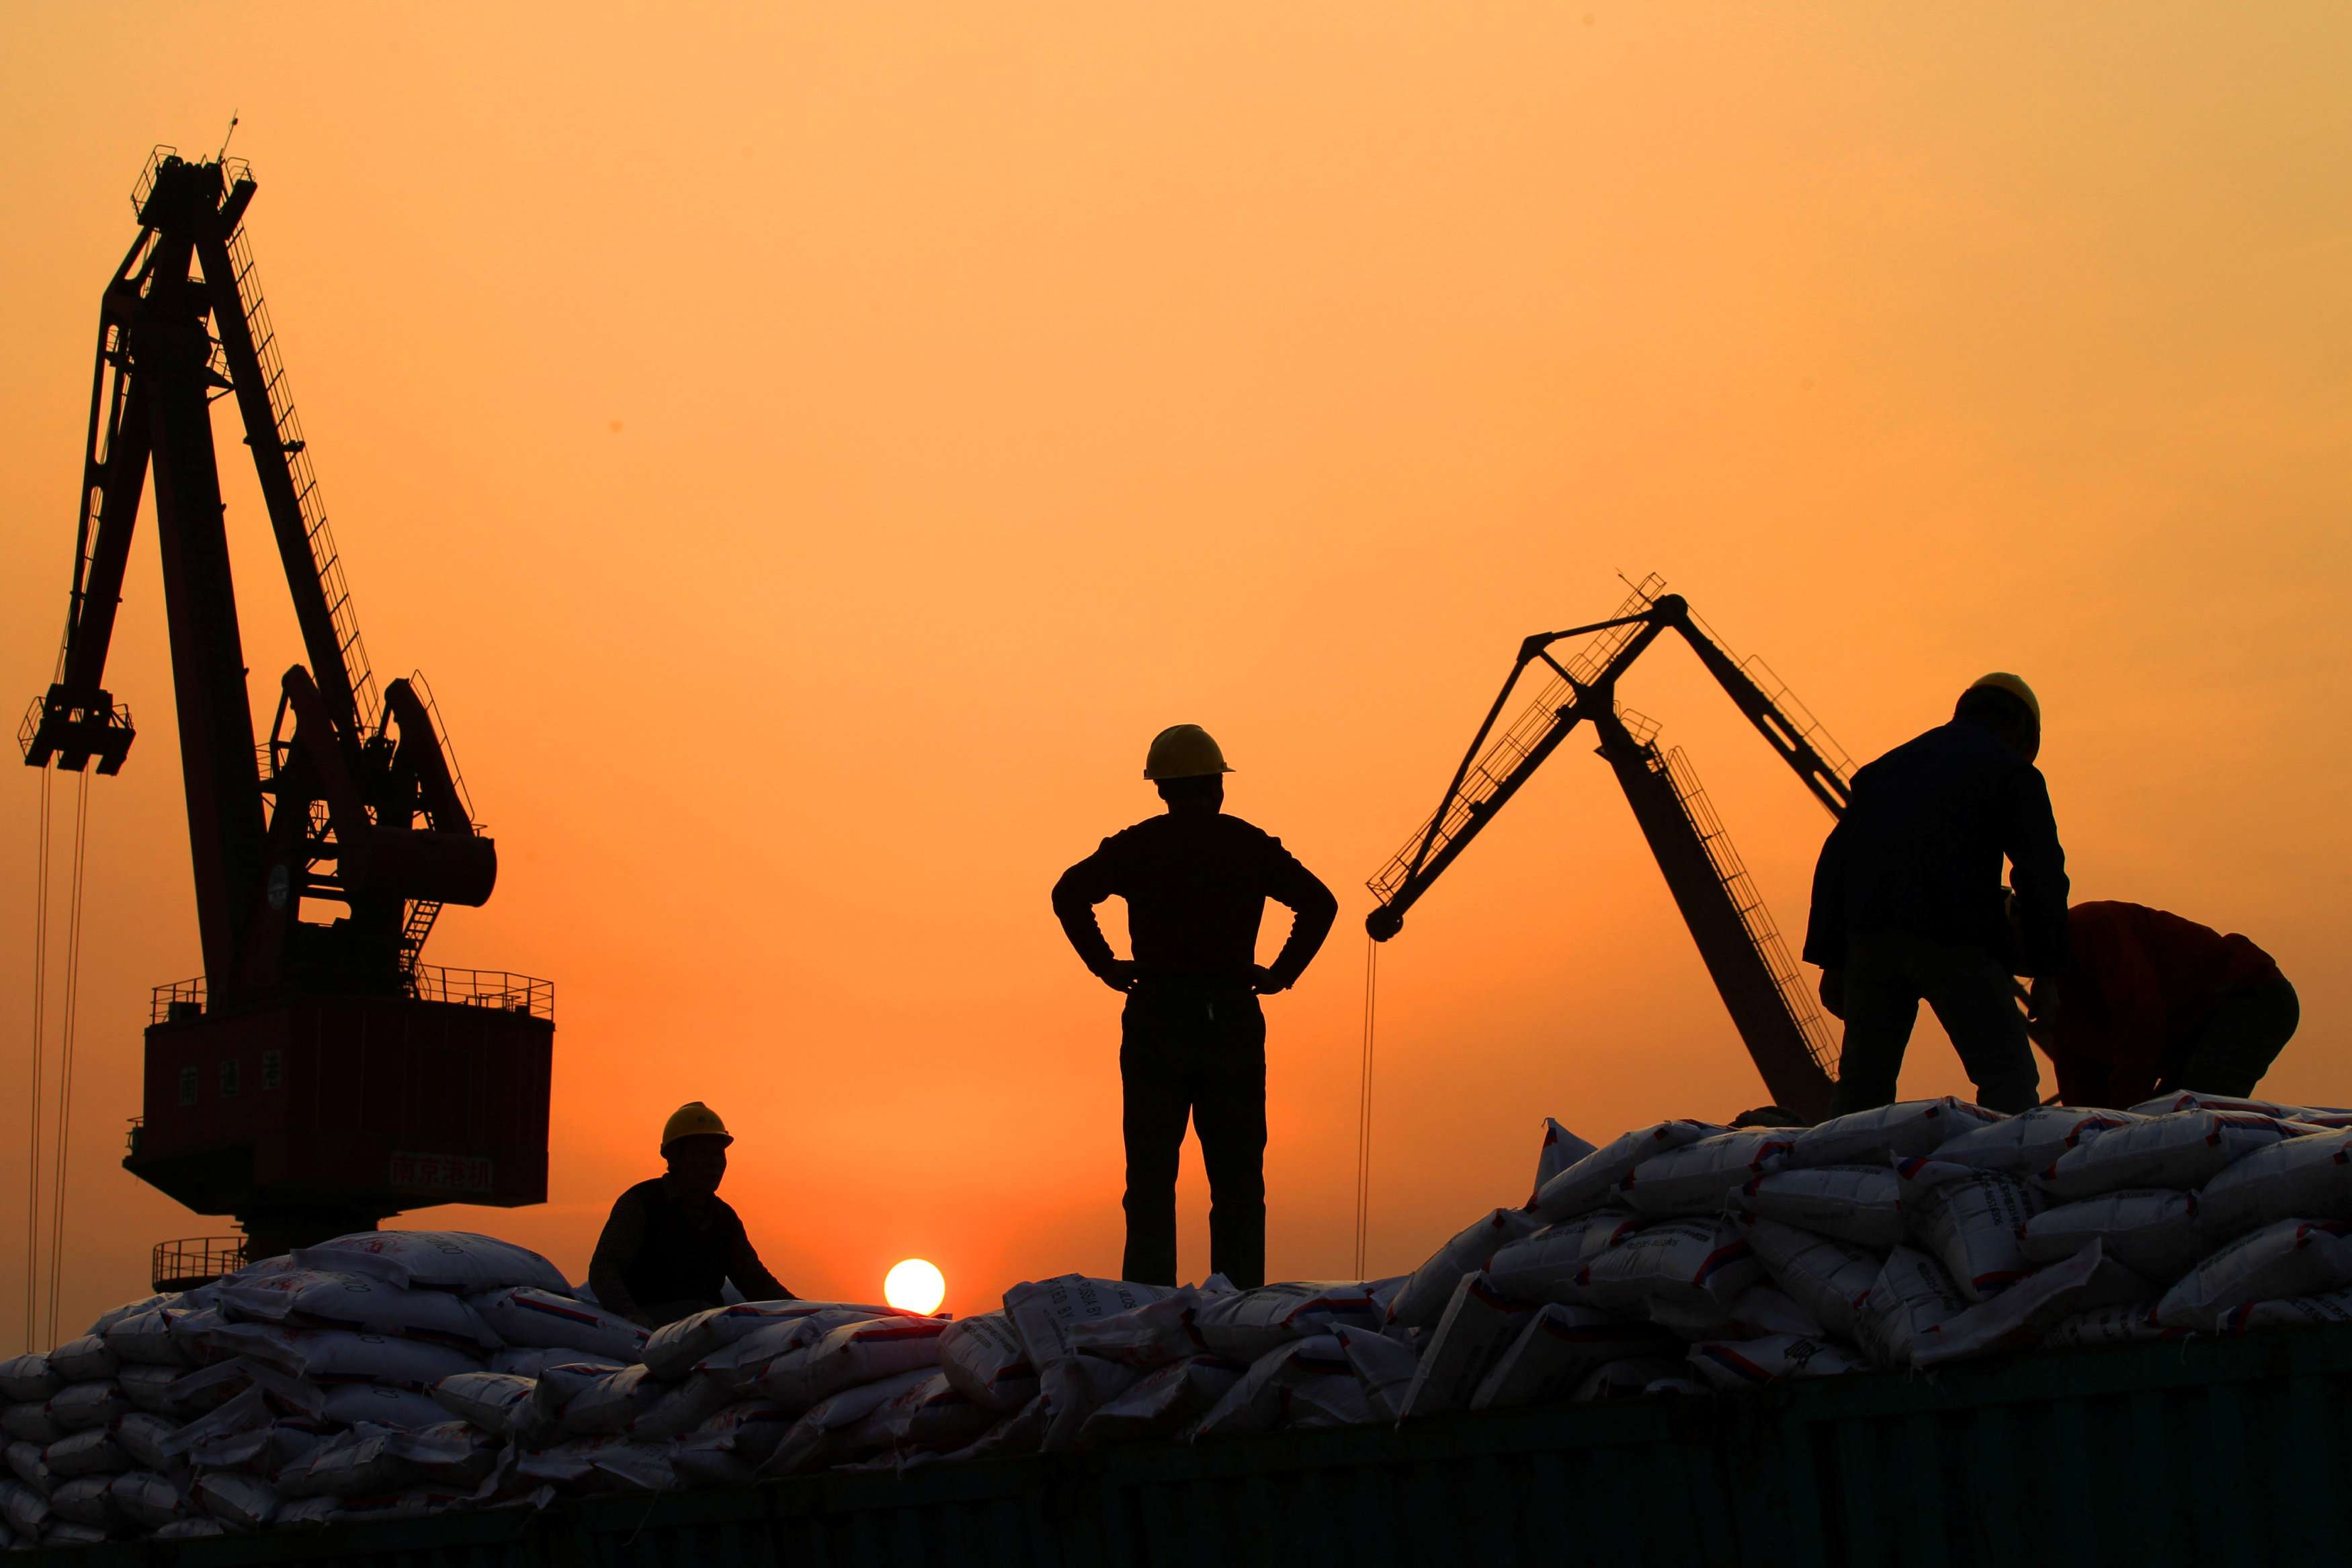 Workers load goods at a port in Nantong in Jiangsu province. China’s ‘One Belt’ strategy calls for billions of dollars to be ploughed into new railways, ports, and energy projects in 65 countries. Photo: Reuters